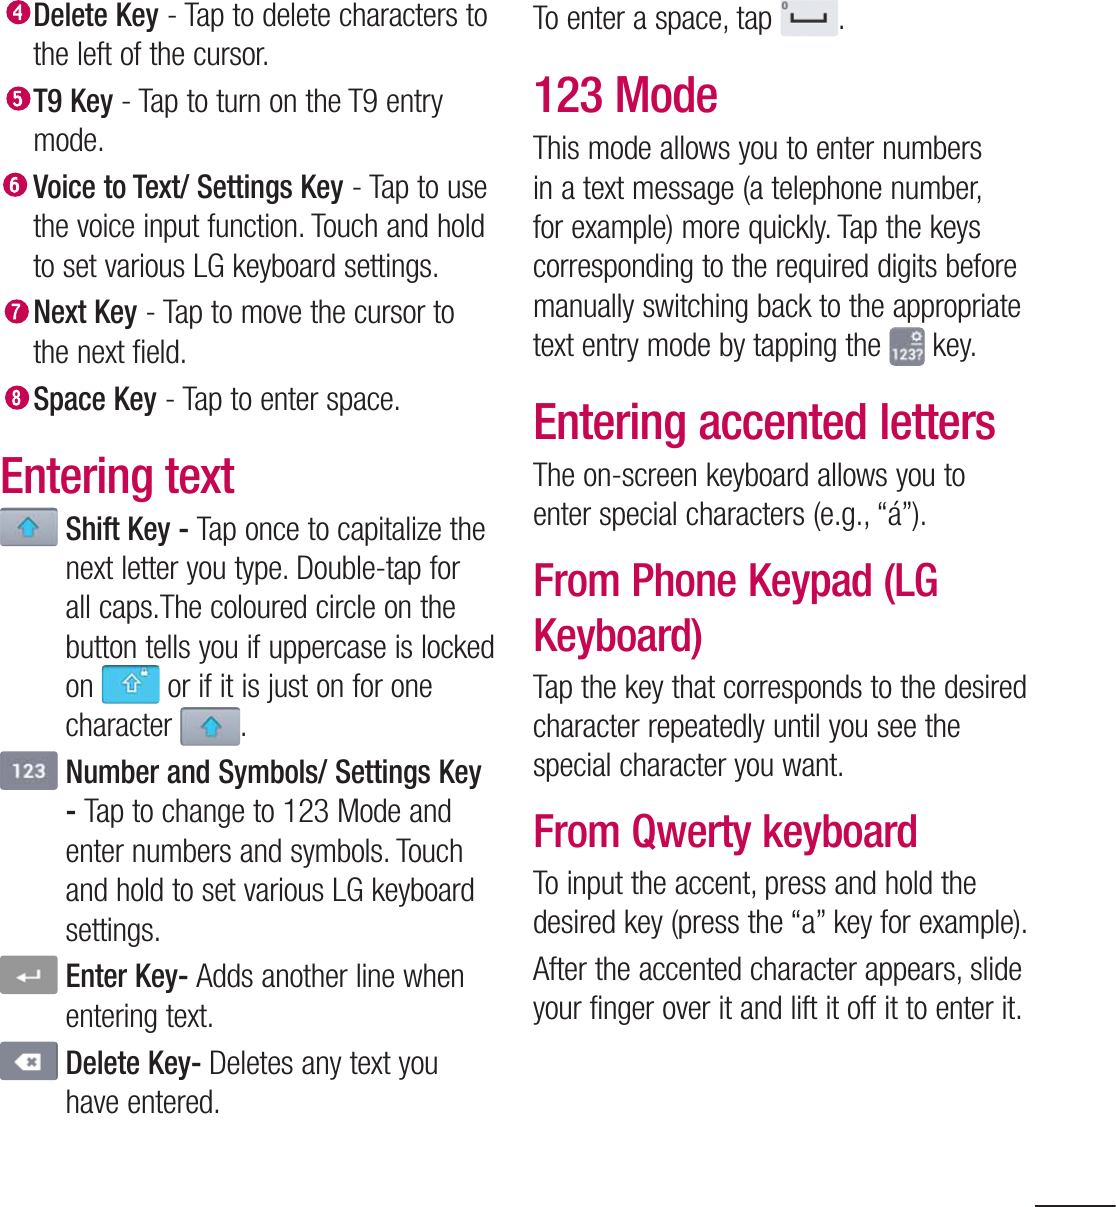 41 Delete Key - Tap to delete characters to the left of the cursor. T9 Key - Tap to turn on the T9 entry mode. Voice to Text/ Settings Key - Tap to use the voice input function. Touch and hold to set various LG keyboard settings. Next Key - Tap to move the cursor to the next field.  Space Key - Tap to enter space.Entering text  Shift Key - Tap once to capitalize the next letter you type. Double-tap for all caps.The coloured circle on the button tells you if uppercase is locked on   or if it is just on for one character  .  Number and Symbols/ Settings Key - Tap to change to 123 Mode and enter numbers and symbols. Touch and hold to set various LG keyboard settings.   Enter Key- Adds another line when entering text.  Delete Key- Deletes any text you have entered.To enter a space, tap  .123 ModeThis mode allows you to enter numbers in a text message (a telephone number, for example) more quickly. Tap the keys corresponding to the required digits before manually switching back to the appropriate text entry mode by tapping the   key.Entering accented lettersThe on-screen keyboard allows you to enter special characters (e.g., “á”).From Phone Keypad (LG Keyboard)Tap the key that corresponds to the desired character repeatedly until you see the special character you want.From Qwerty keyboardTo input the accent, press and hold the desired key (press the “a” key for example).After the accented character appears, slide your finger over it and lift it off it to enter it.